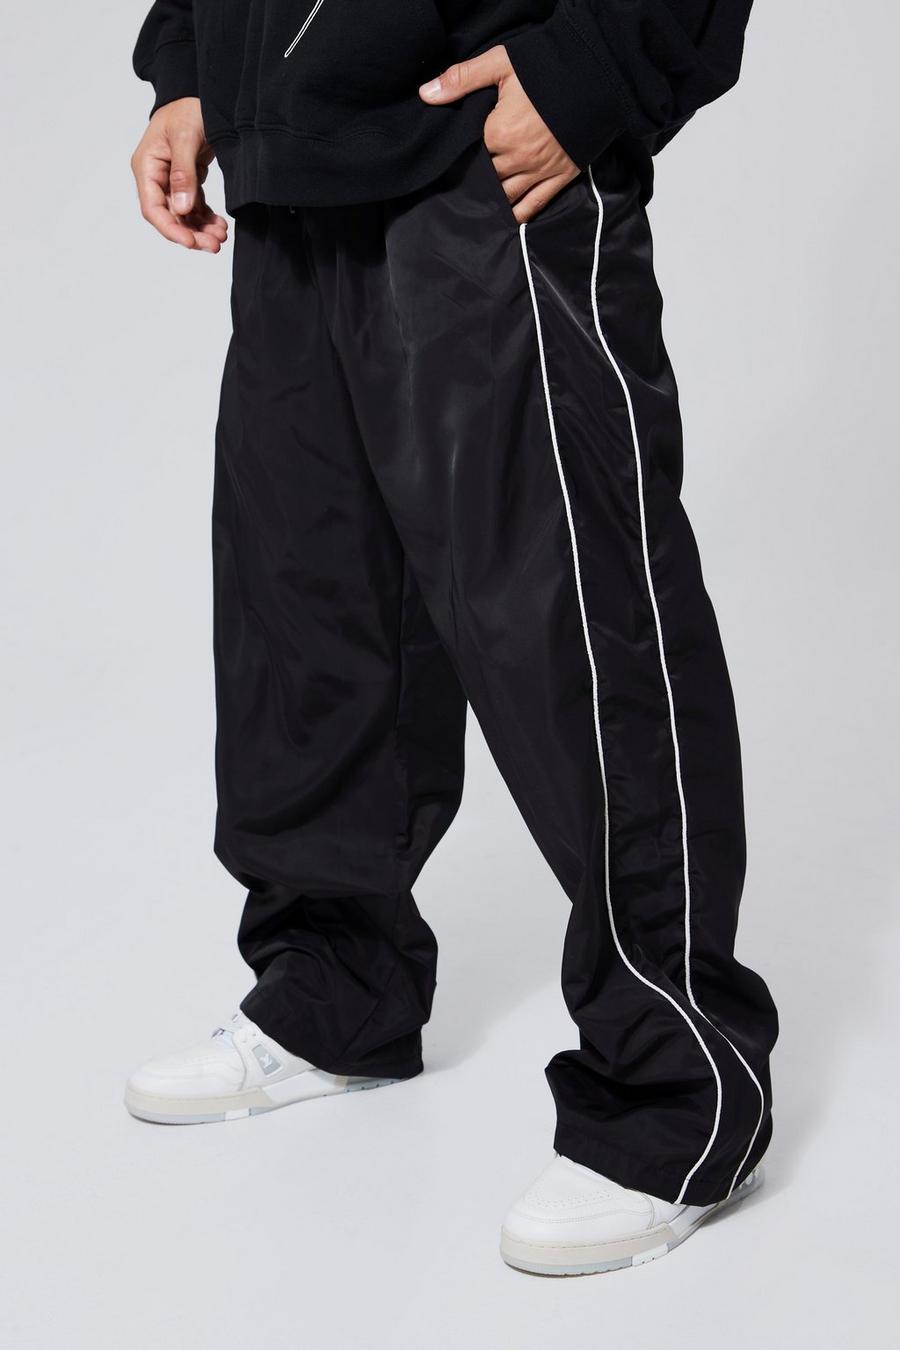 Black Elastic Waist Wide Fit Piping Trouser